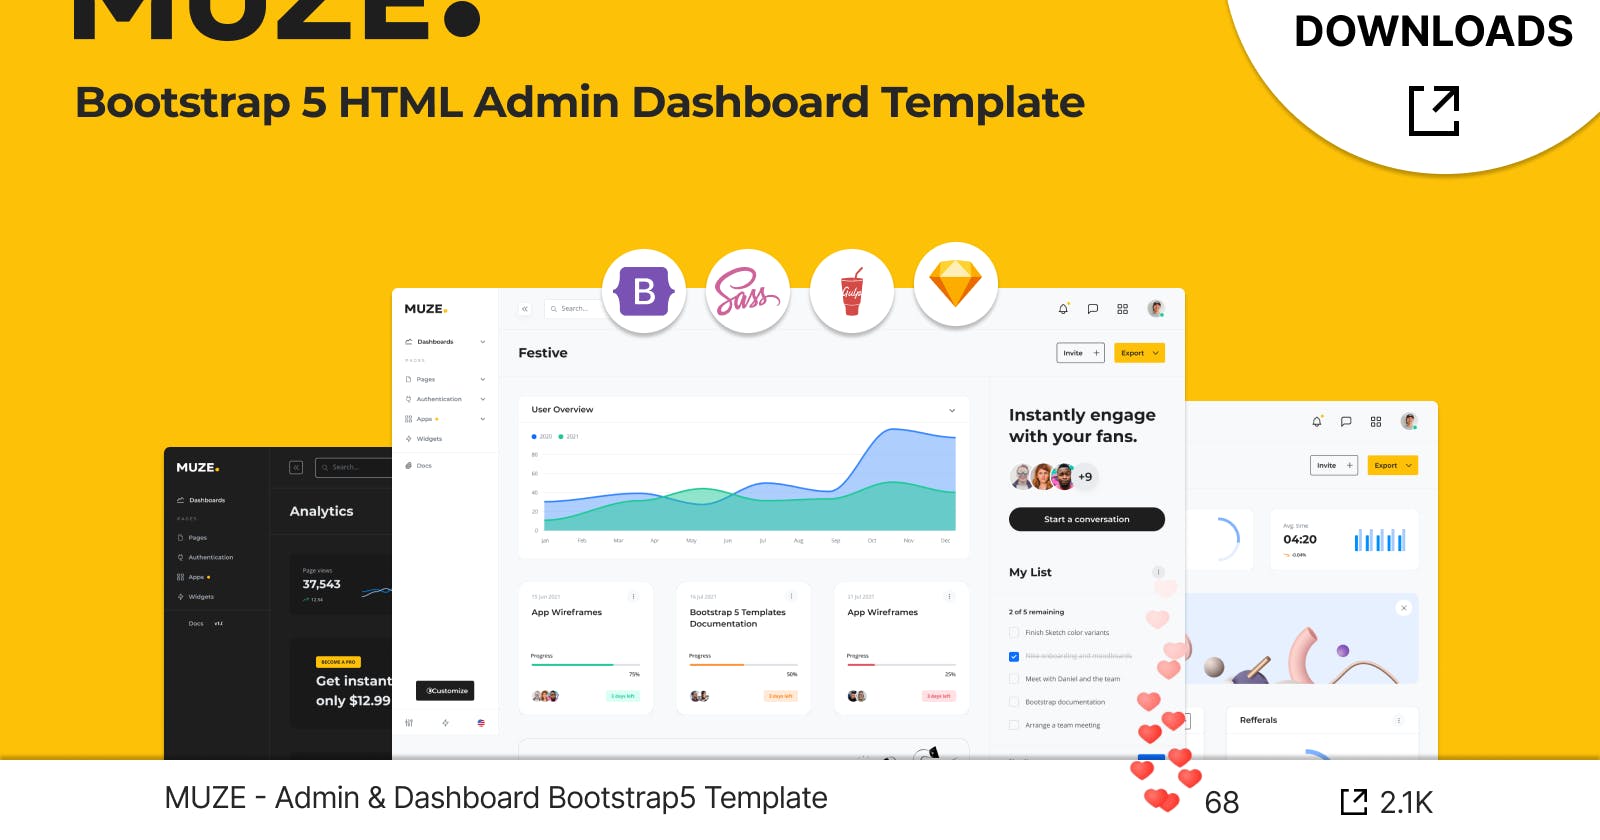 Why Html Developers Use Bootstrap 5 Admin Templates To Make Development Faster